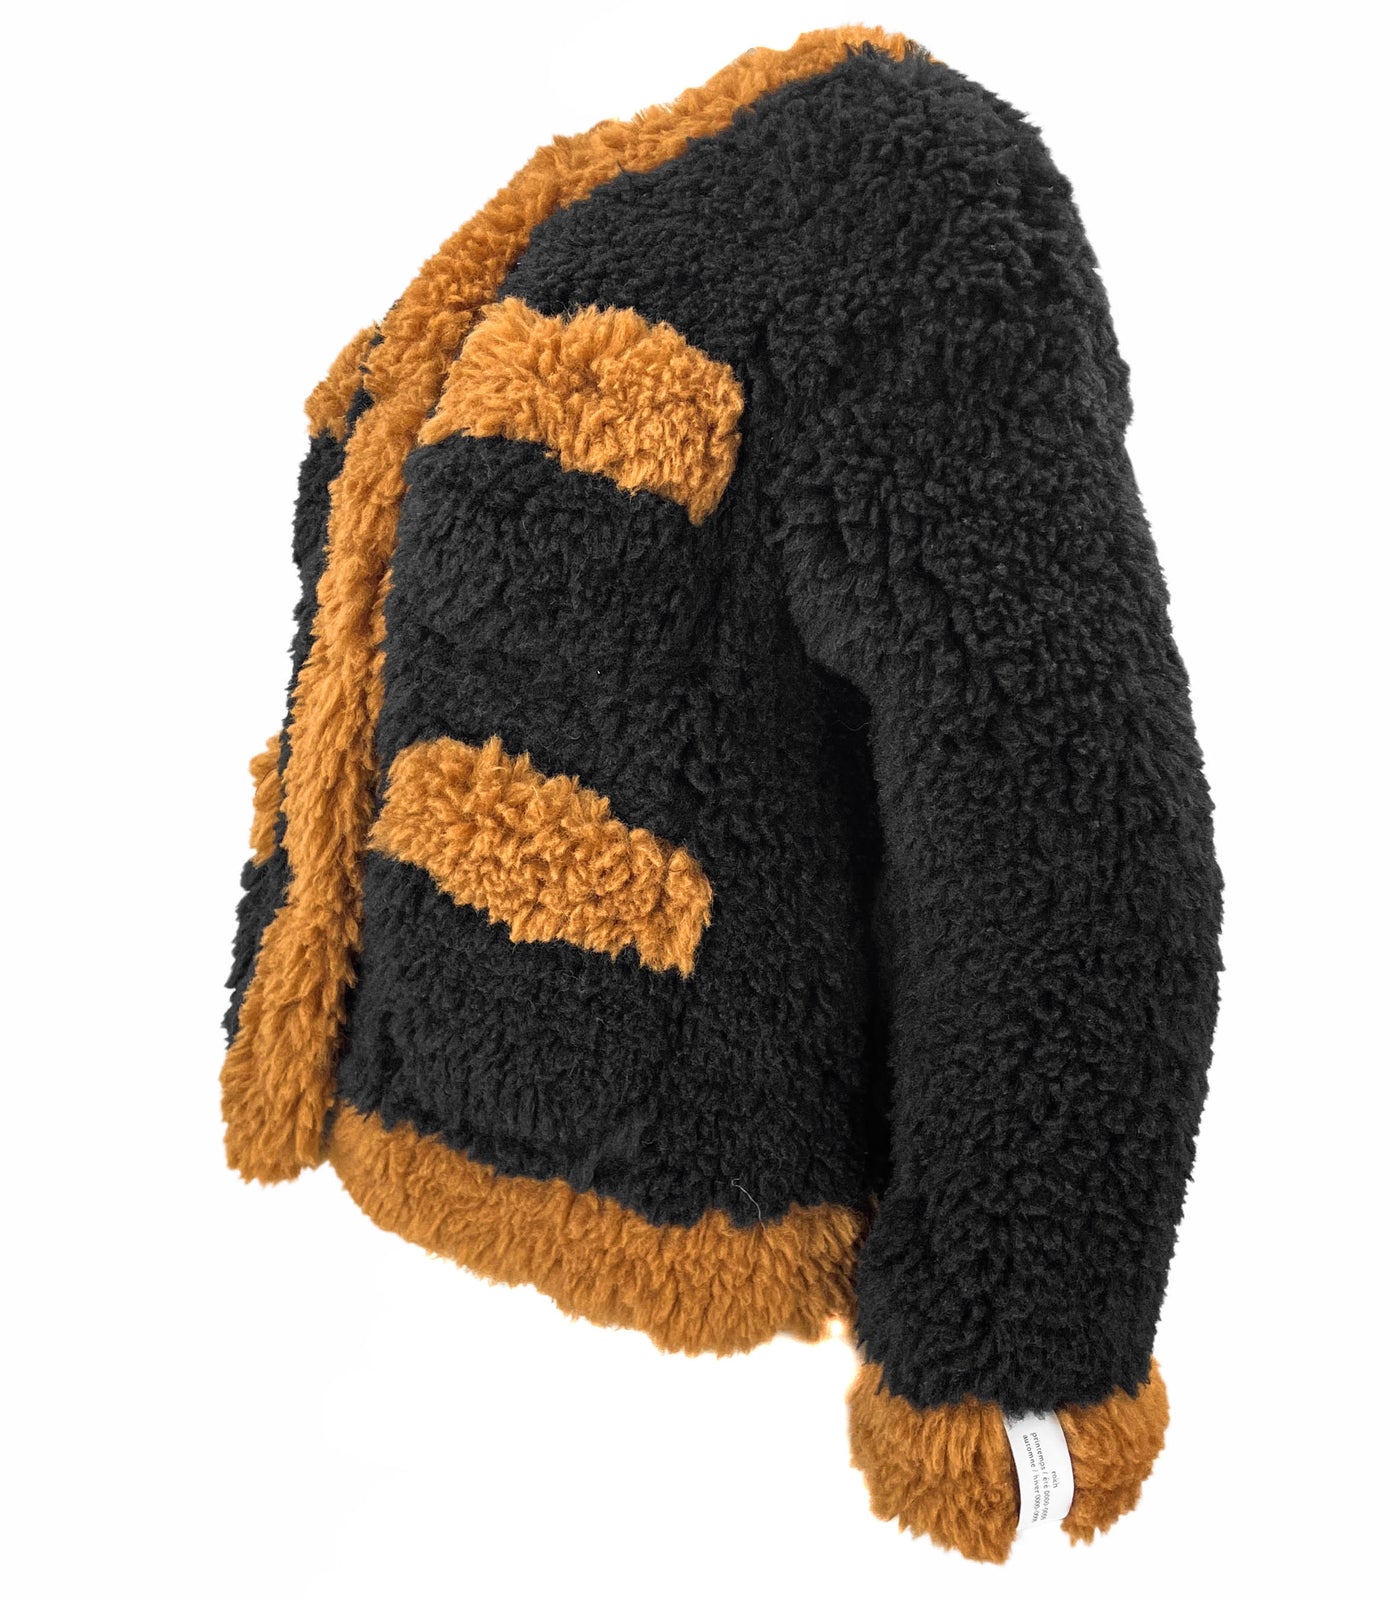 rokh Faux Fur Shearling Jack in Brown/Black - Discounts on rokh at UAL